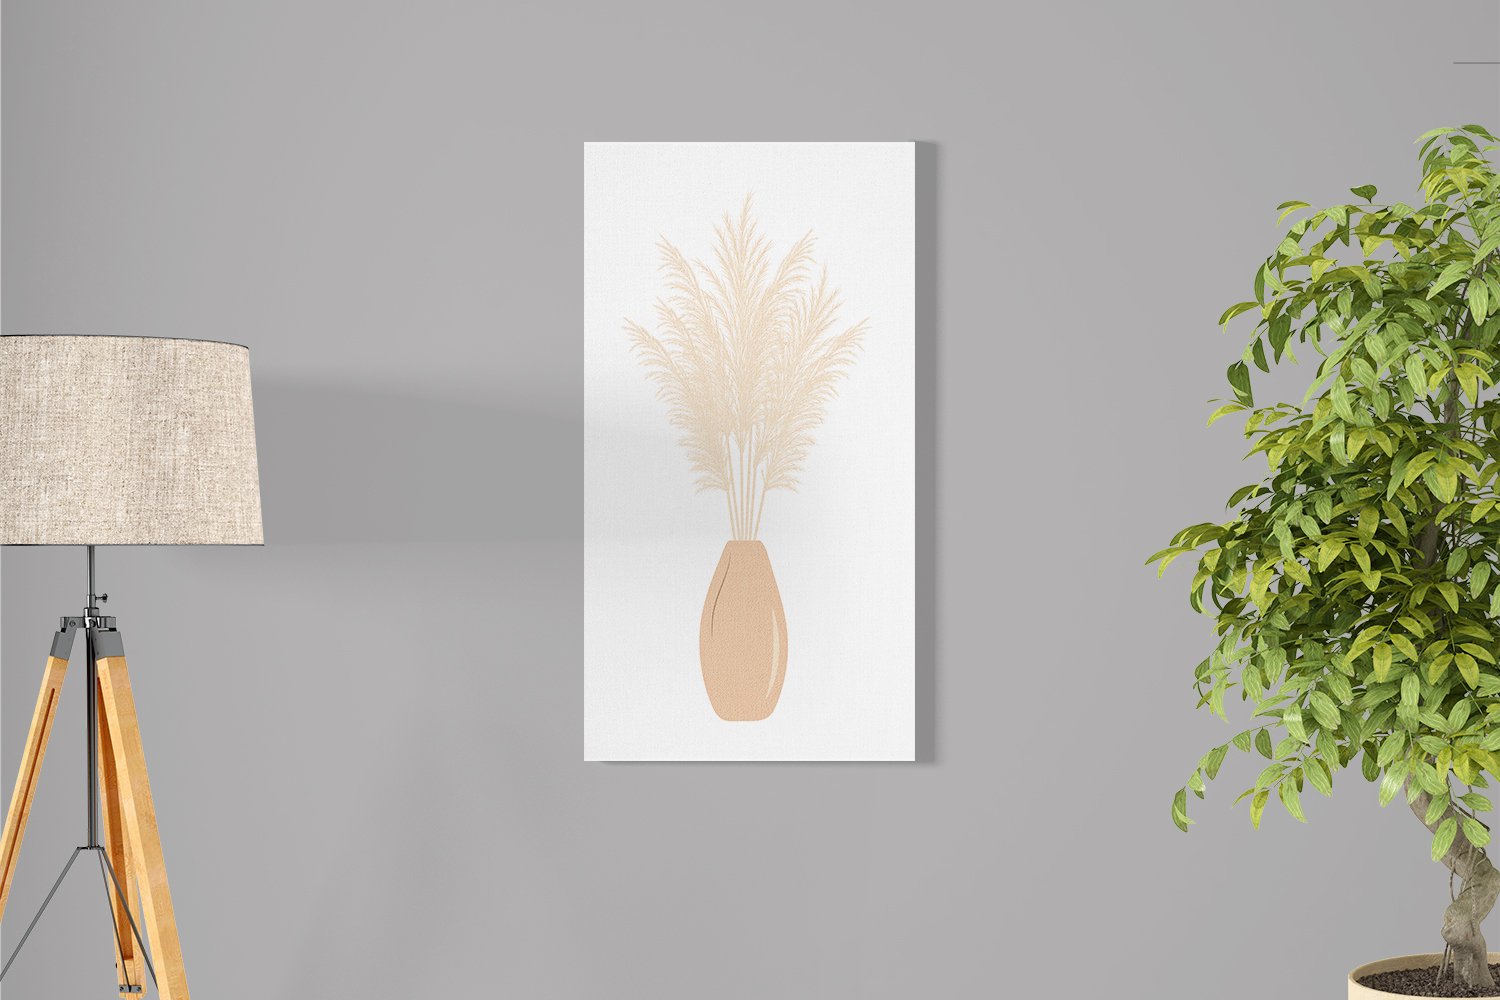 Plant in a vase next to a picture on a wall.